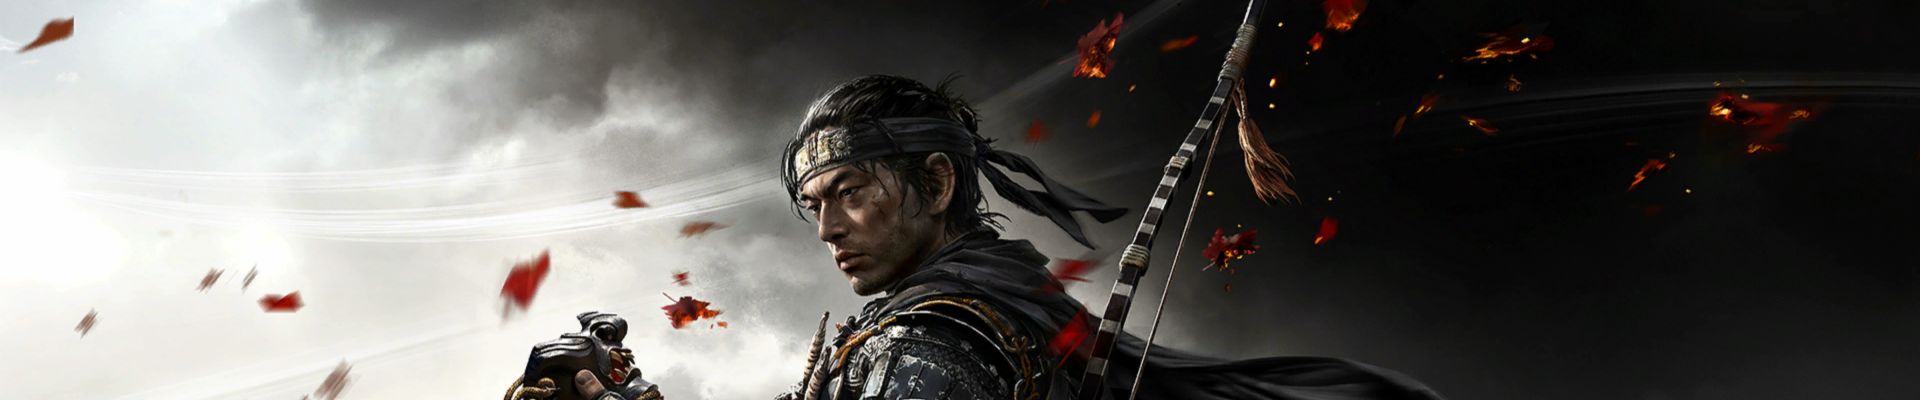 Ghost of Tsushima Trophy Guide •